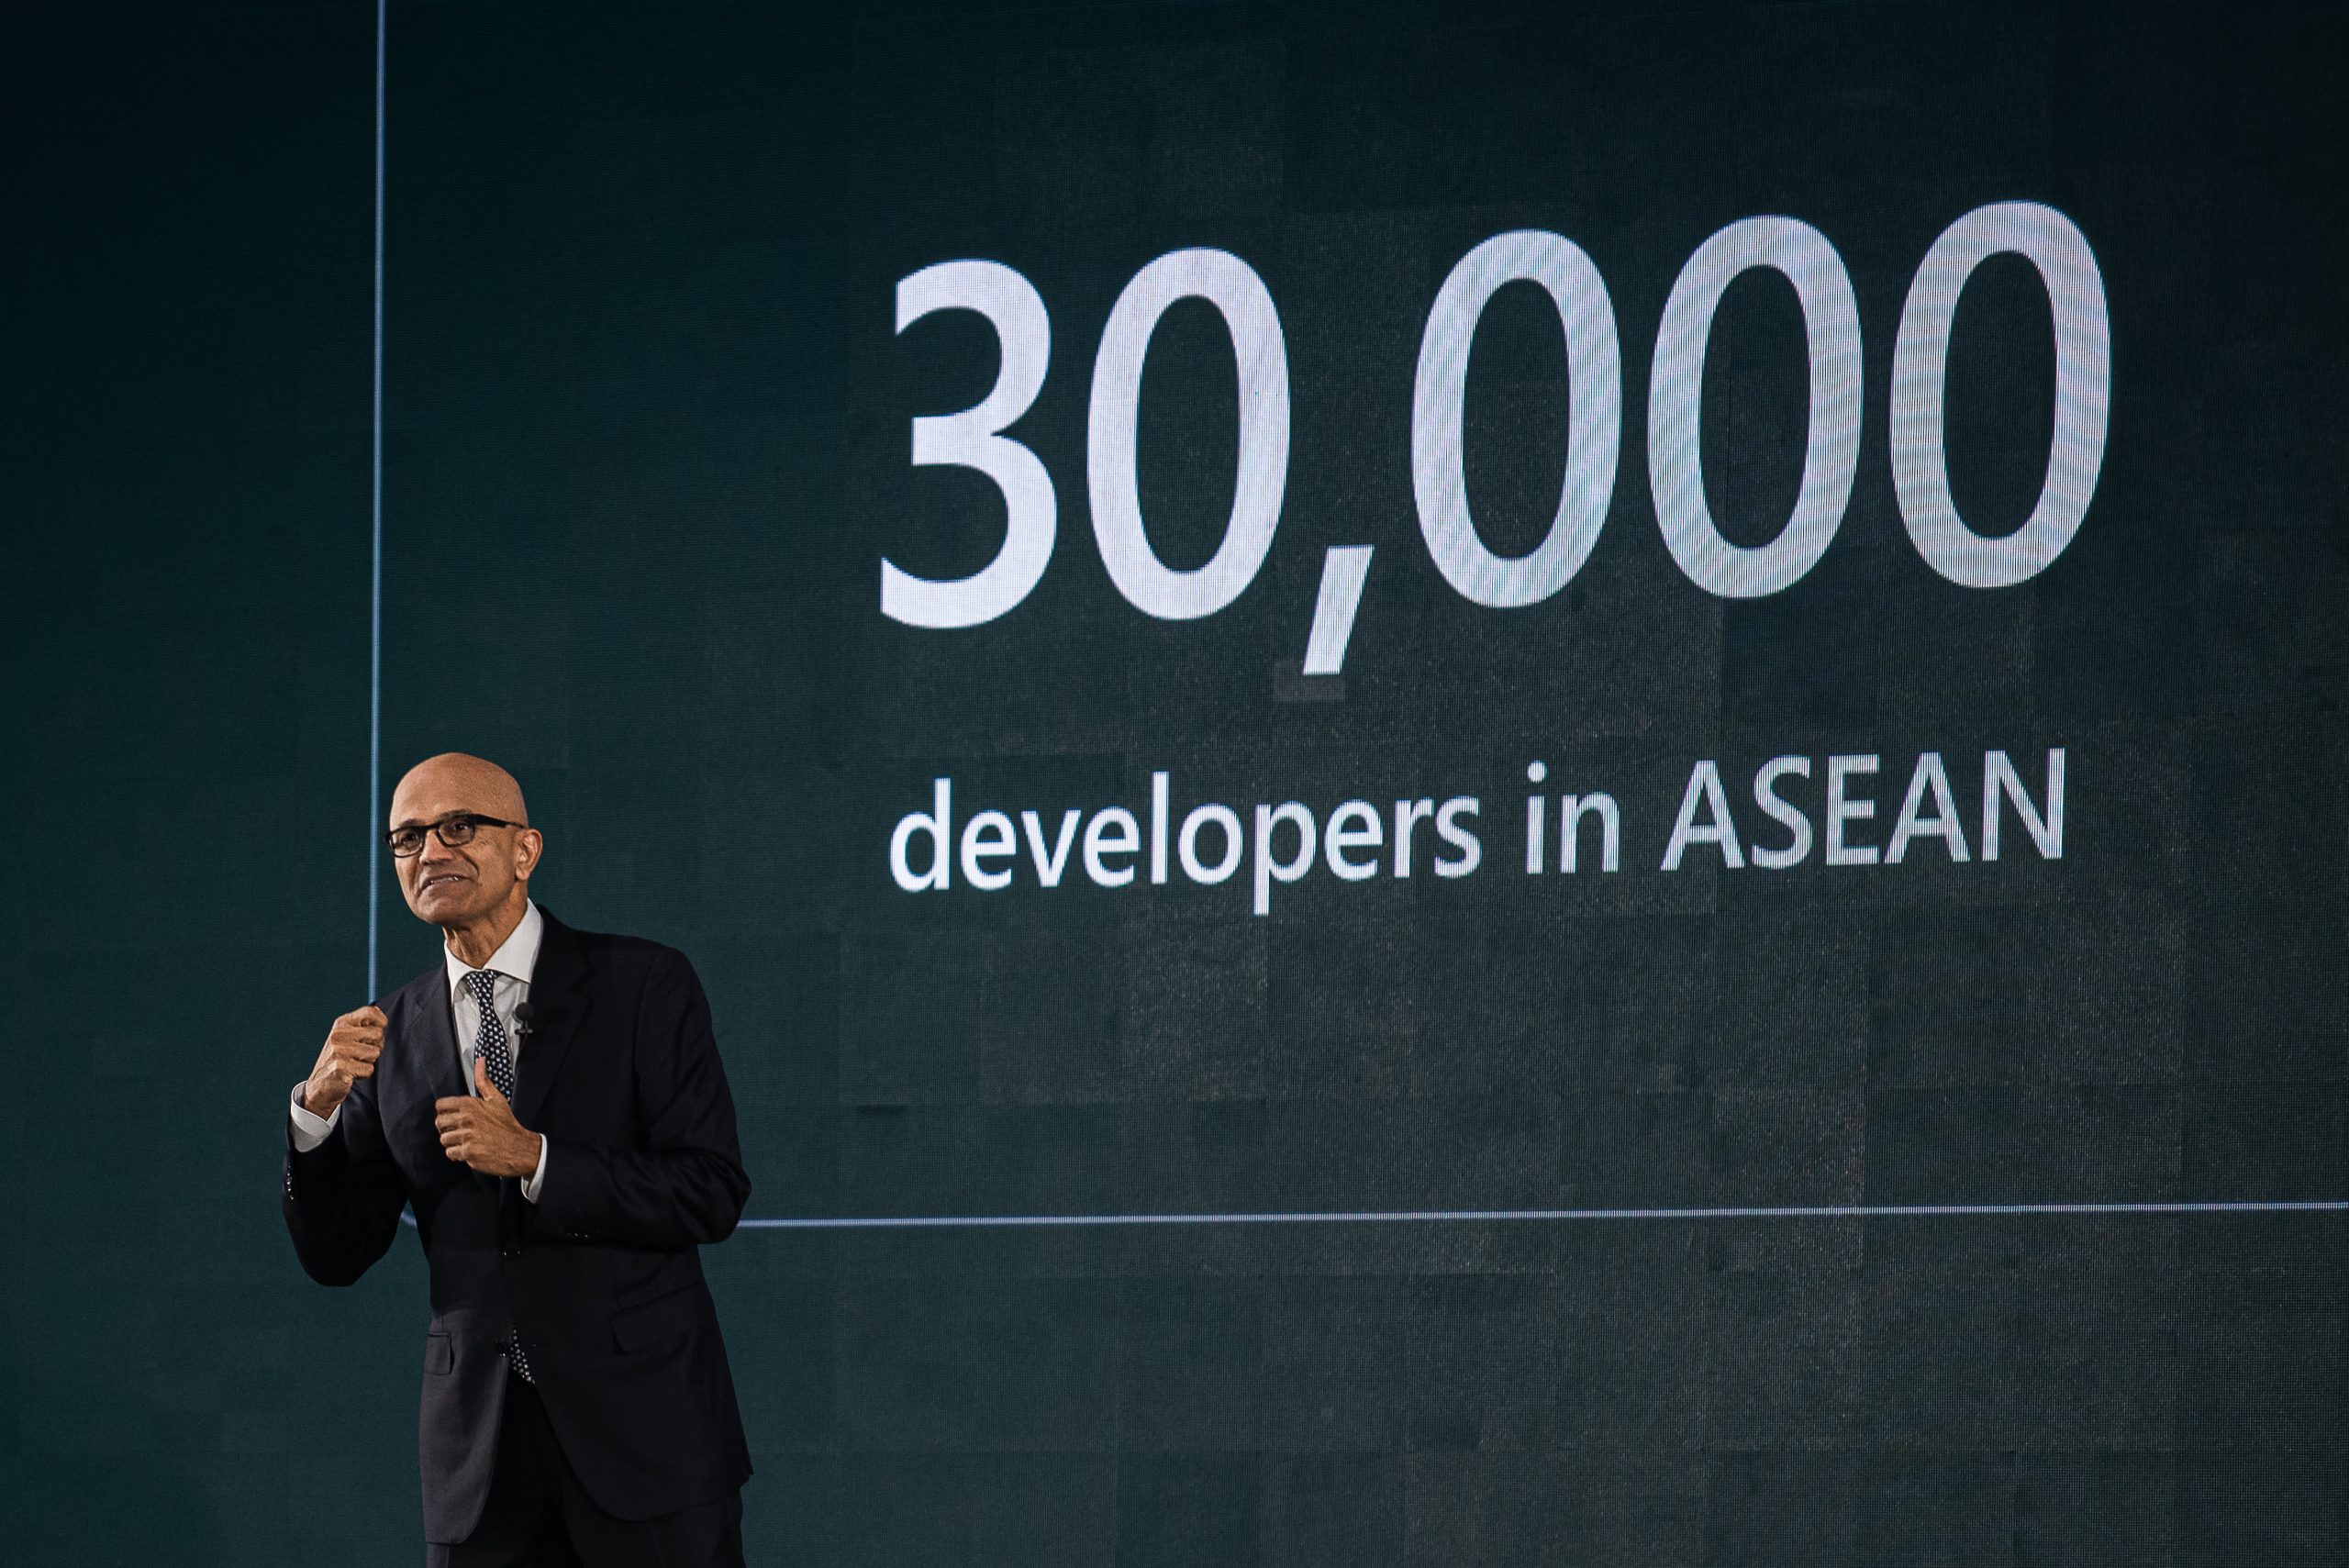 Microsoft to open new data center in Thailand as it doubles down on AI and Southeast Asia